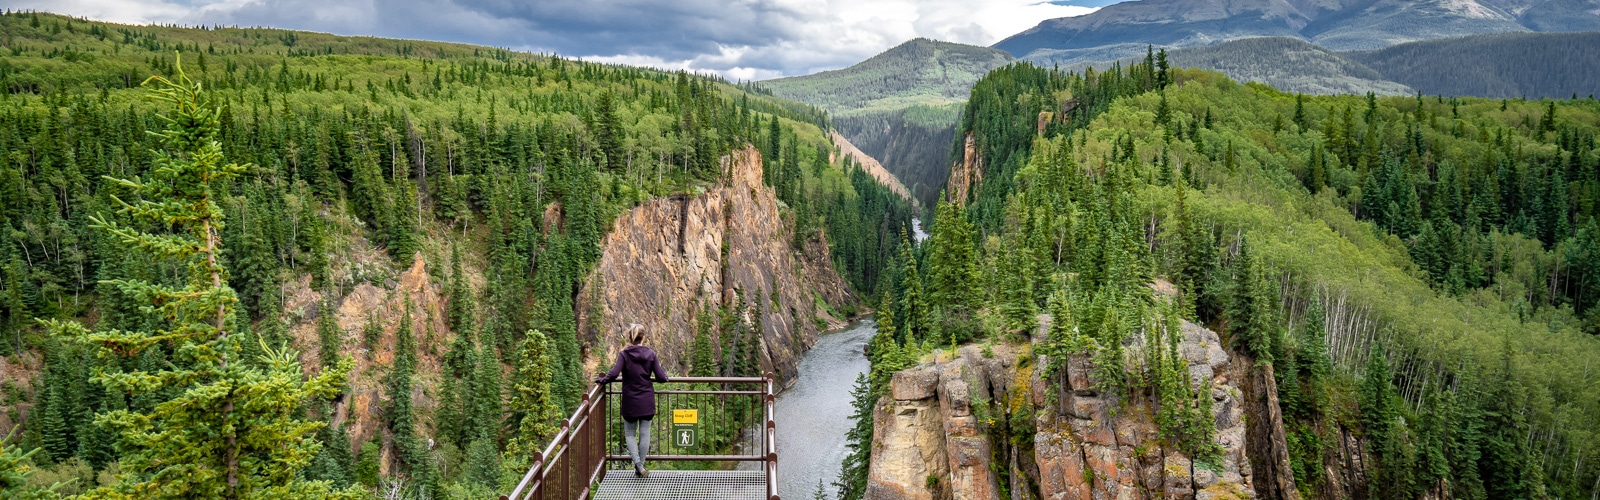 Grande Cache – Mecca for Recreation & Adventure in NW Alberta Foothills